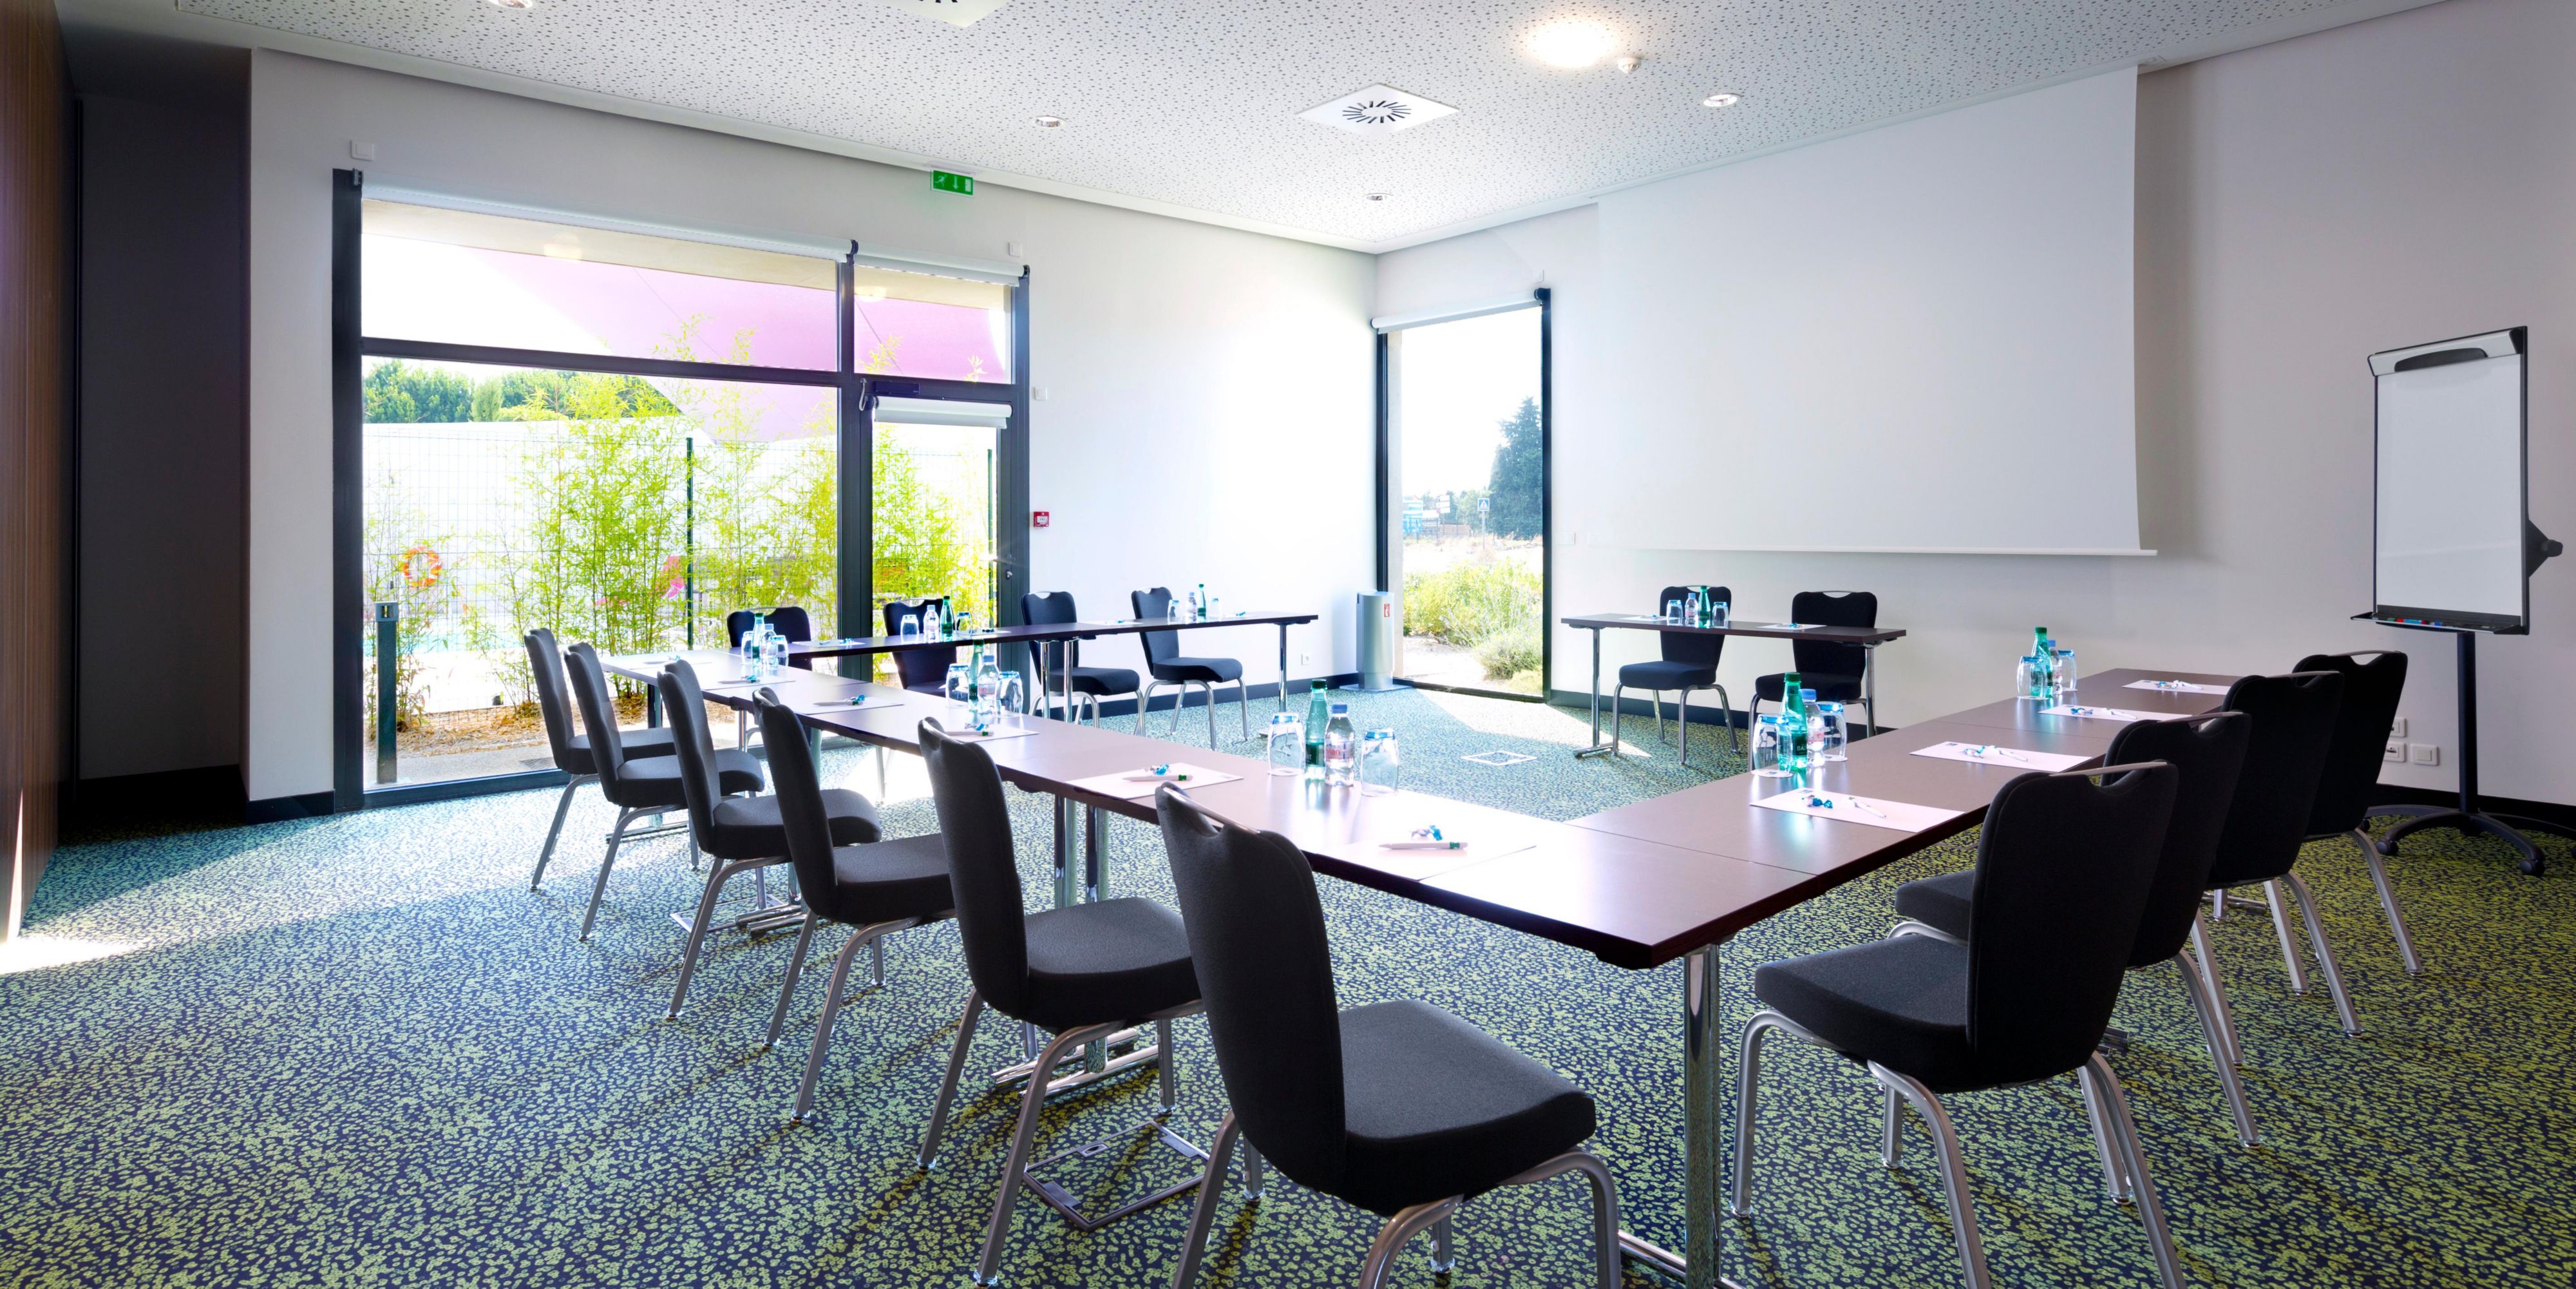 The Holiday Inn Express Montpellier Odysseum is ideal for meetings for up to 100 people. There are 3 meeting rooms, 2 of which can be adjusted. They have a large bay window which opens up to the garden during breaks.